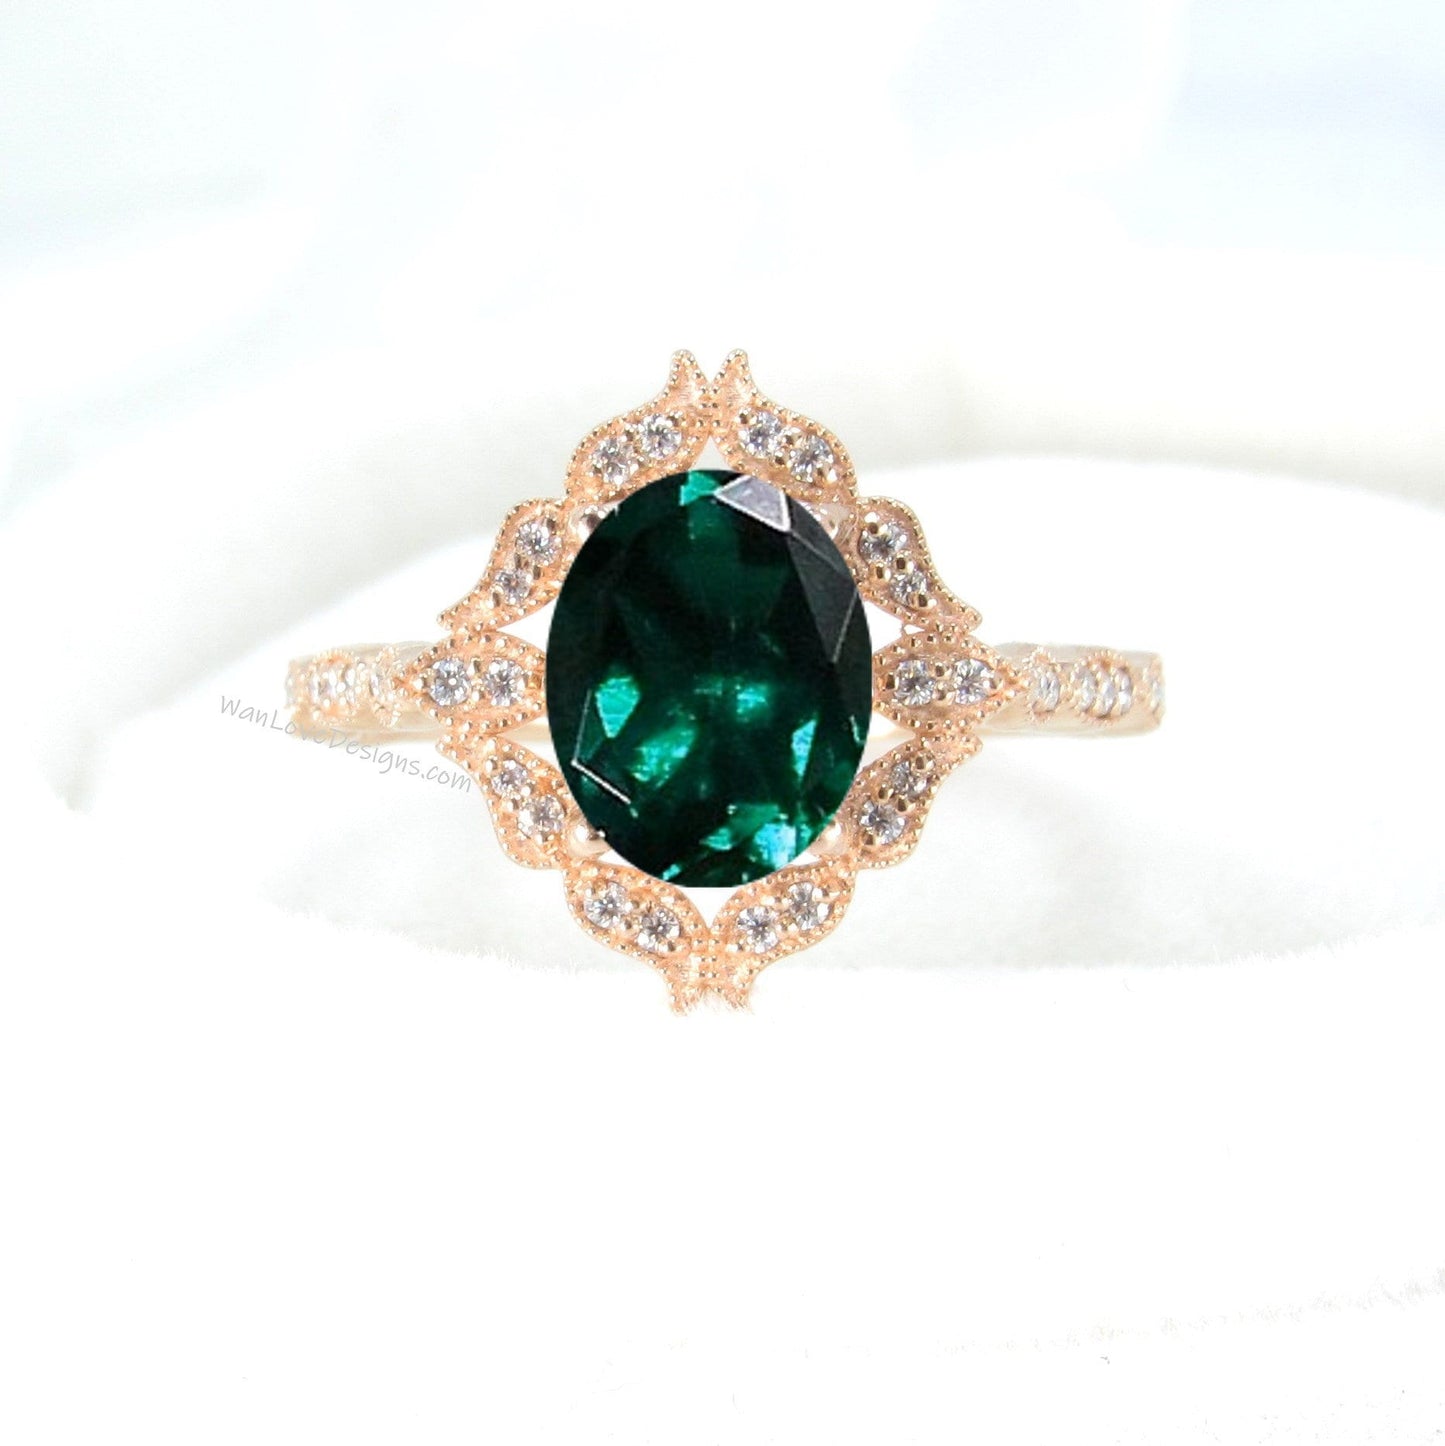 Emerald Oval & Diamond Ring, Floral Diamond Ring with Emerald, Emerald Milgrain Ring, Green Engagement Ring, Custom, WanLoveDesigns Wan Love Designs